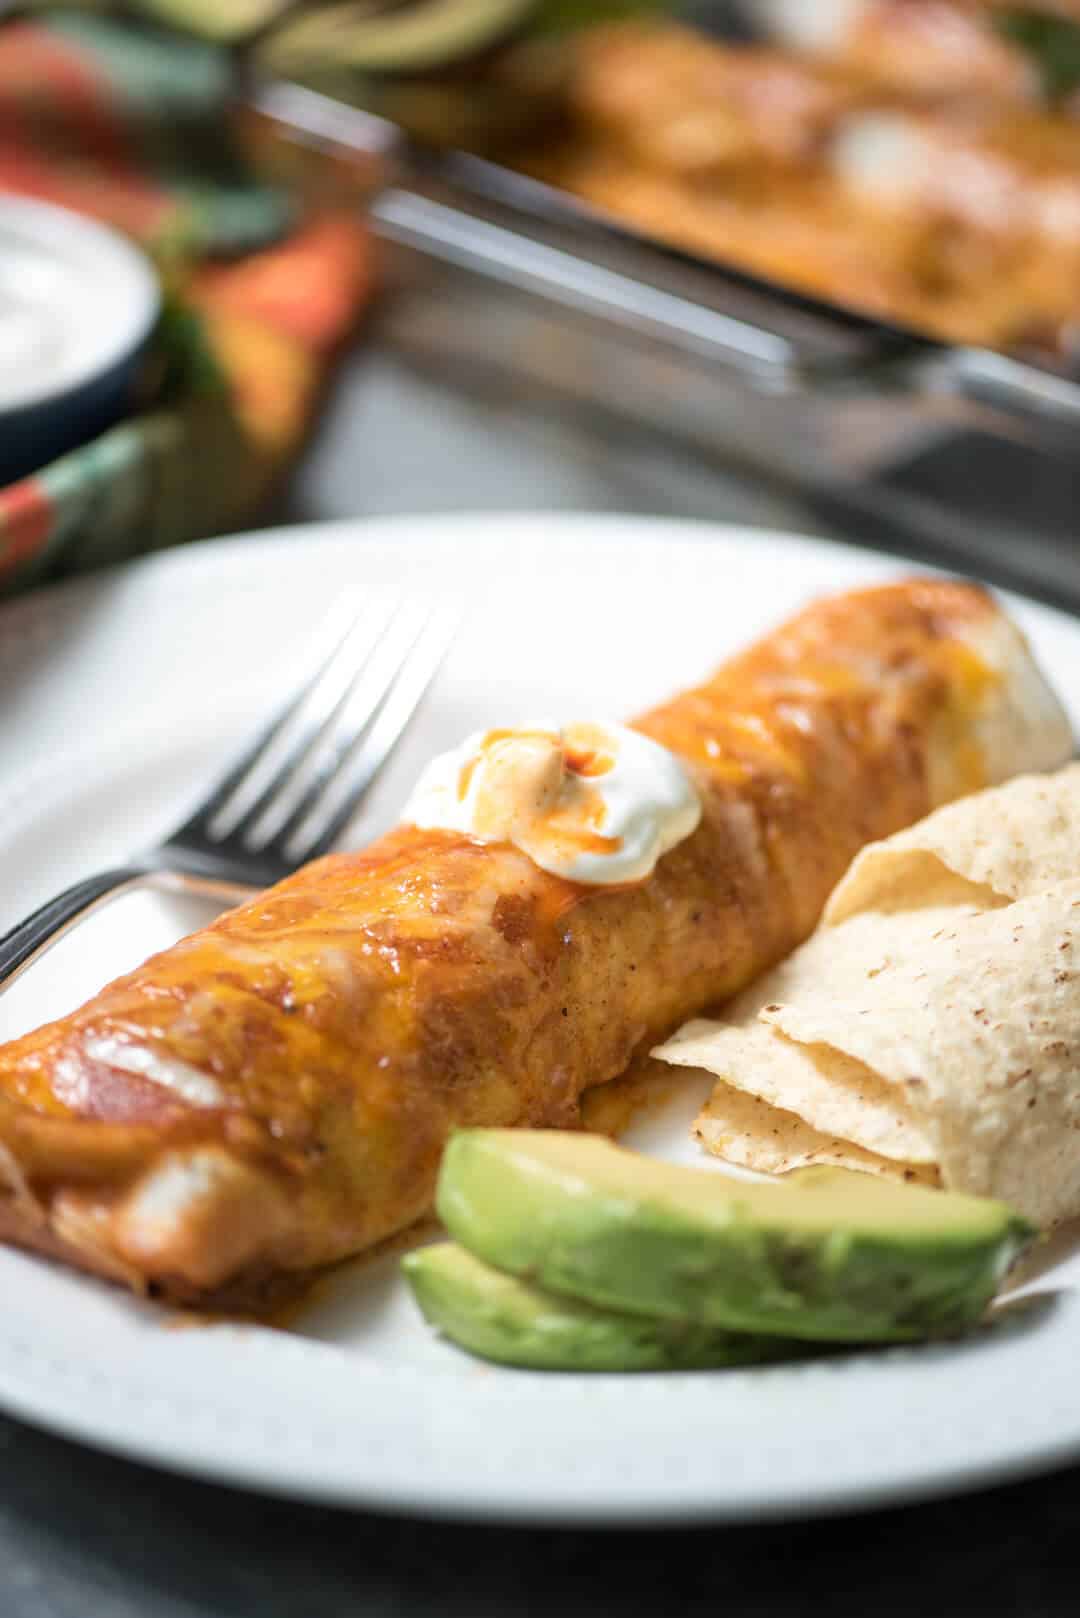 An enchilada on a plate topped with sour cream.